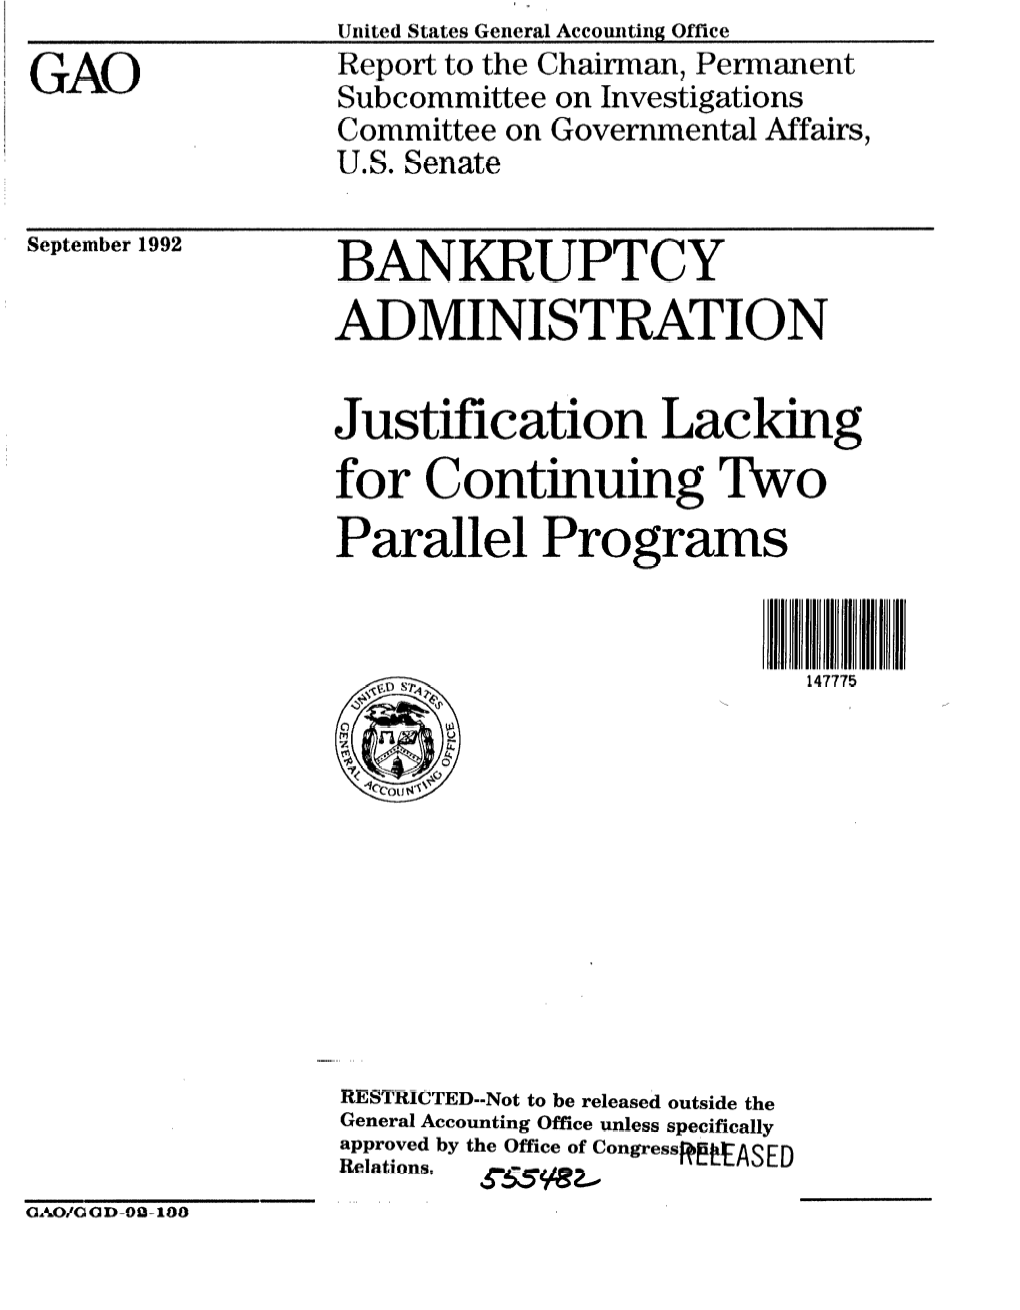 GGD-92-133 Bankruptcy Administration: Justification Lacking for Continuing Two Parallel Programs